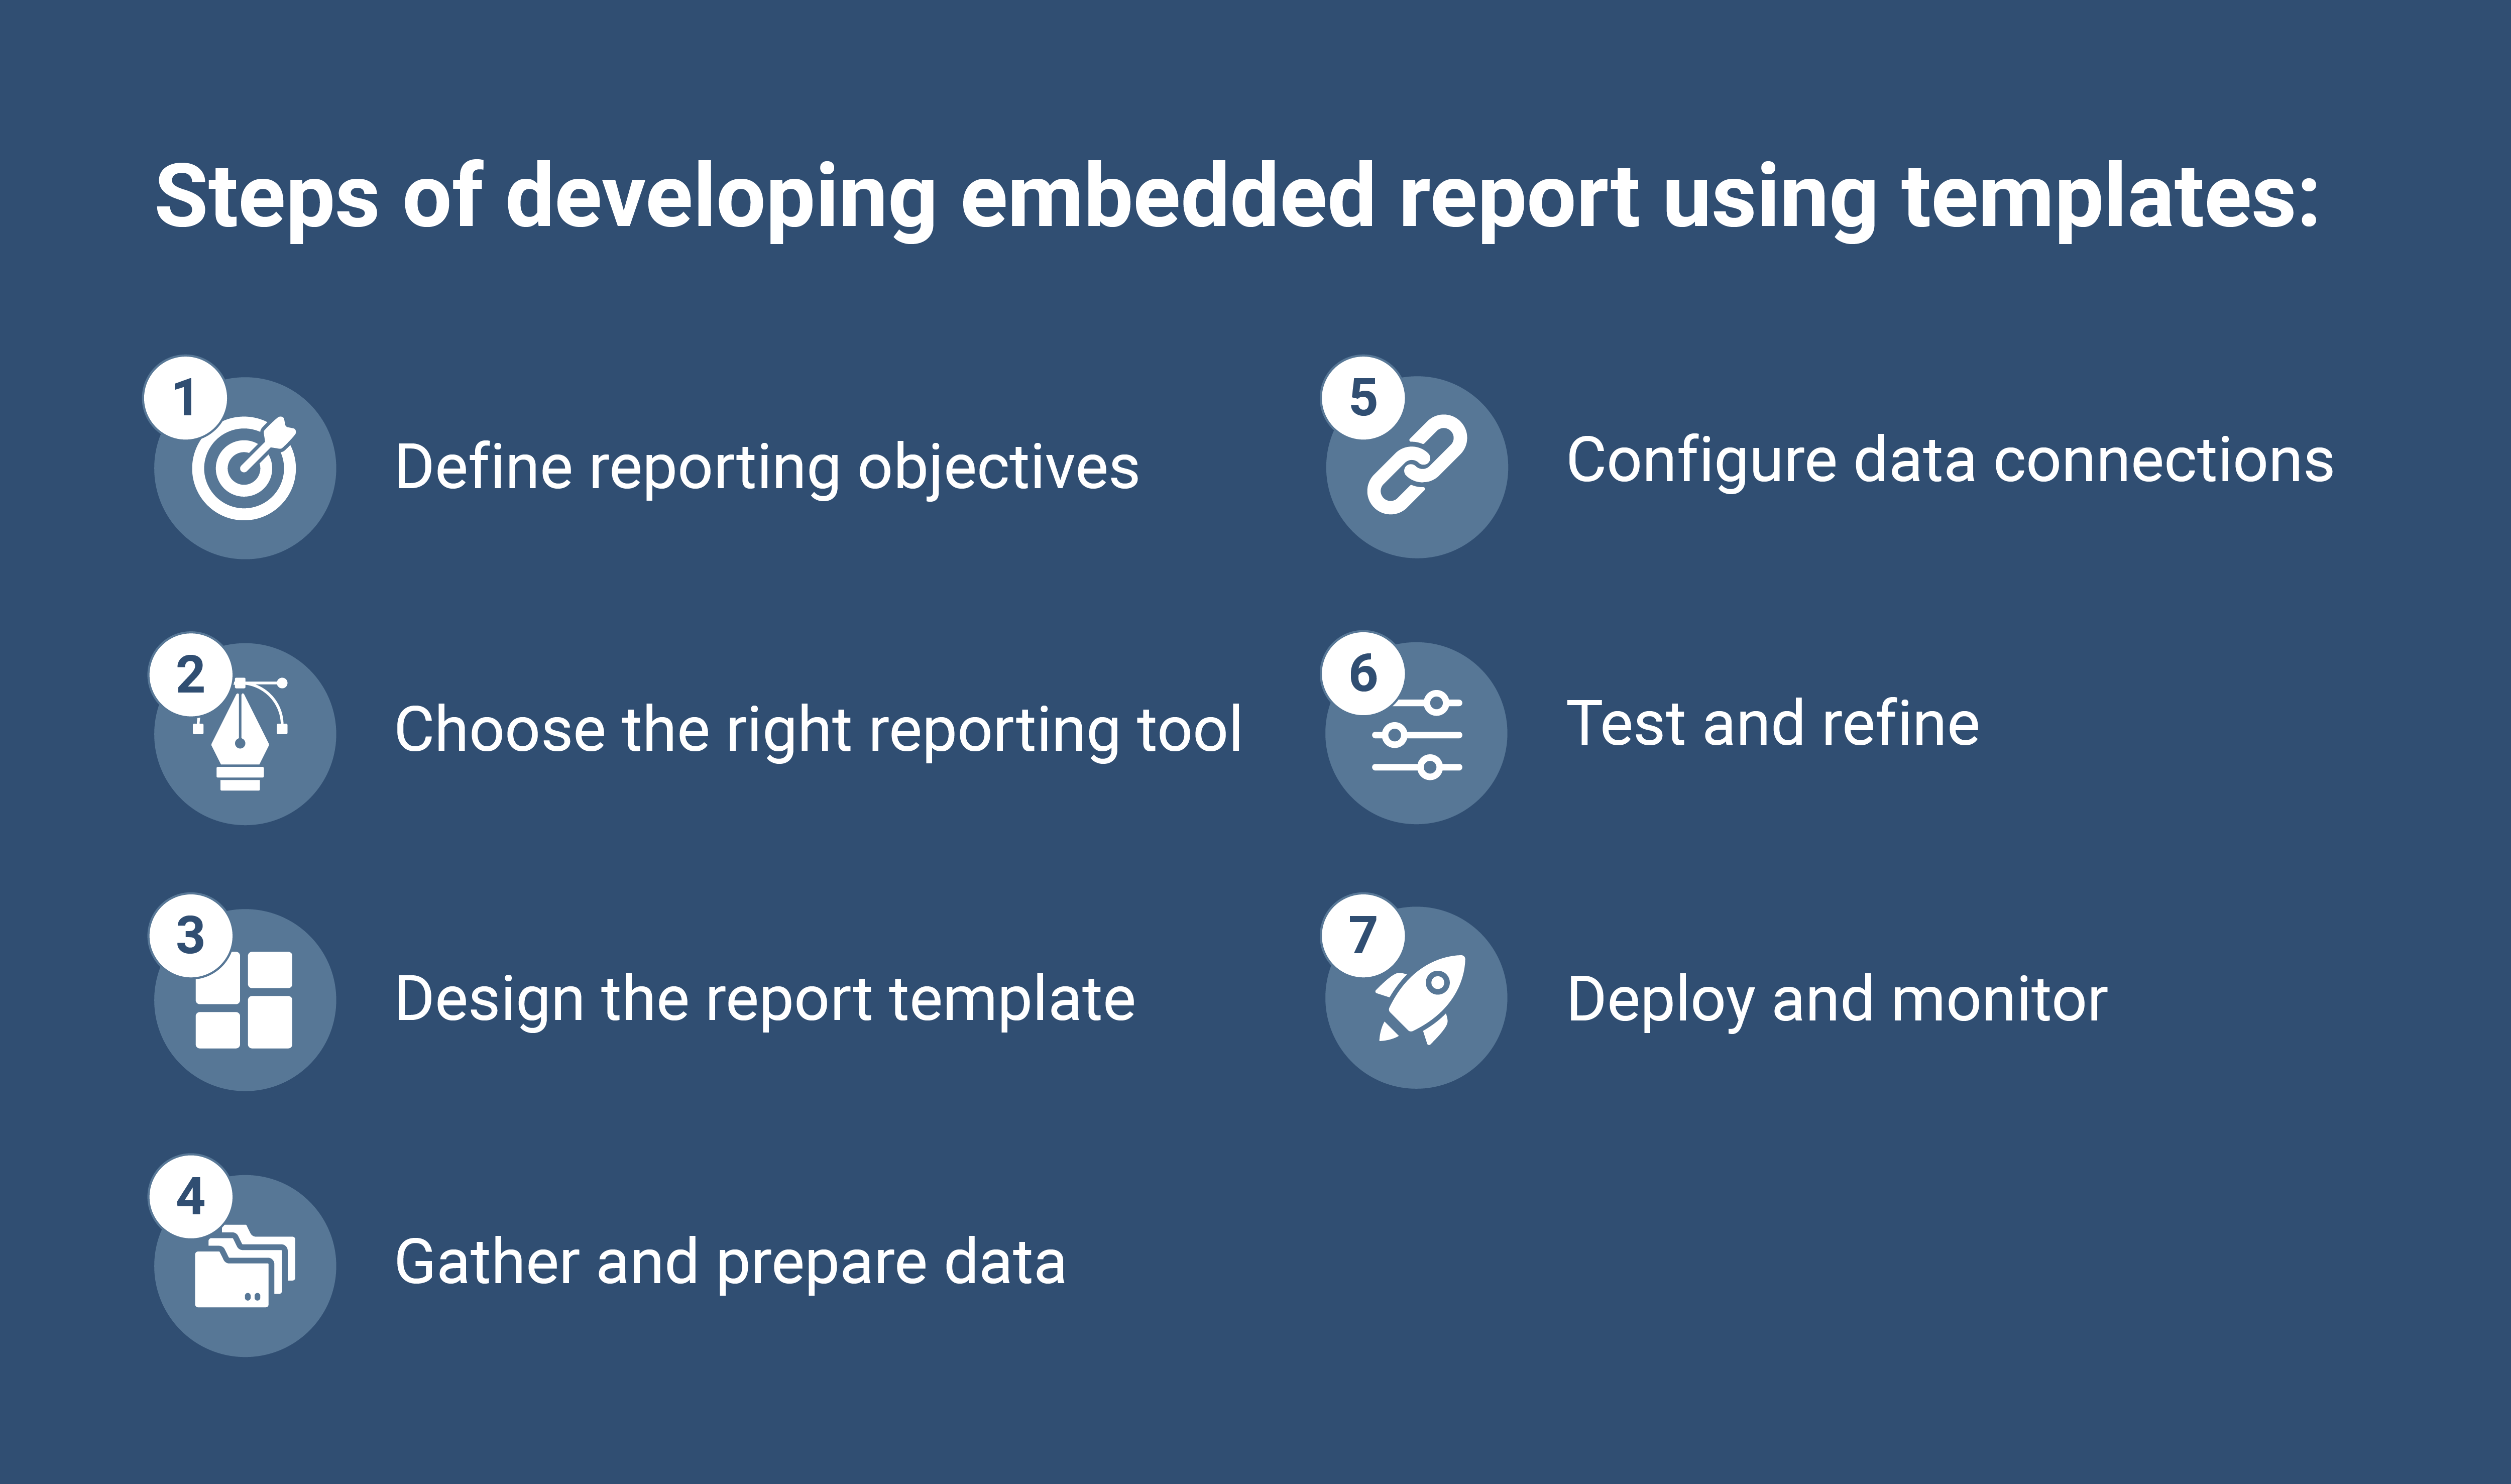 datylon-blog-how-to-use-templates-for-embedded-recurring-reports-blueprintvisuals-3